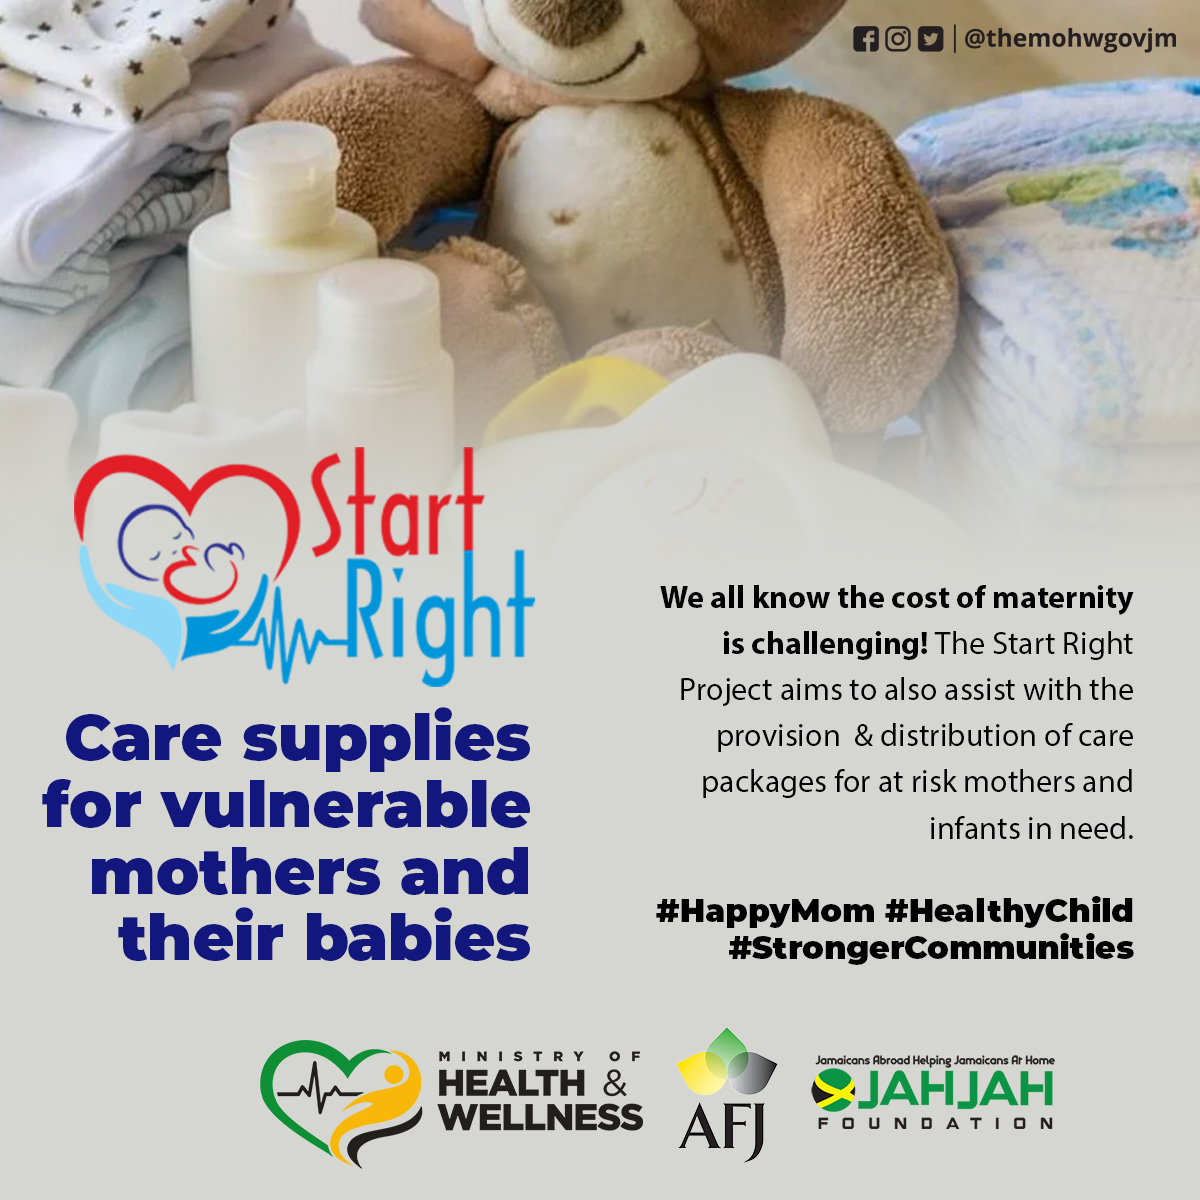 Team Interlinc Communications is proud to be associated with this crucial Maternal & Newborn Healthcare initiative of the Ministry of Health & Wellness, the JAH JAH Foundation and American Friends of Jamaica.